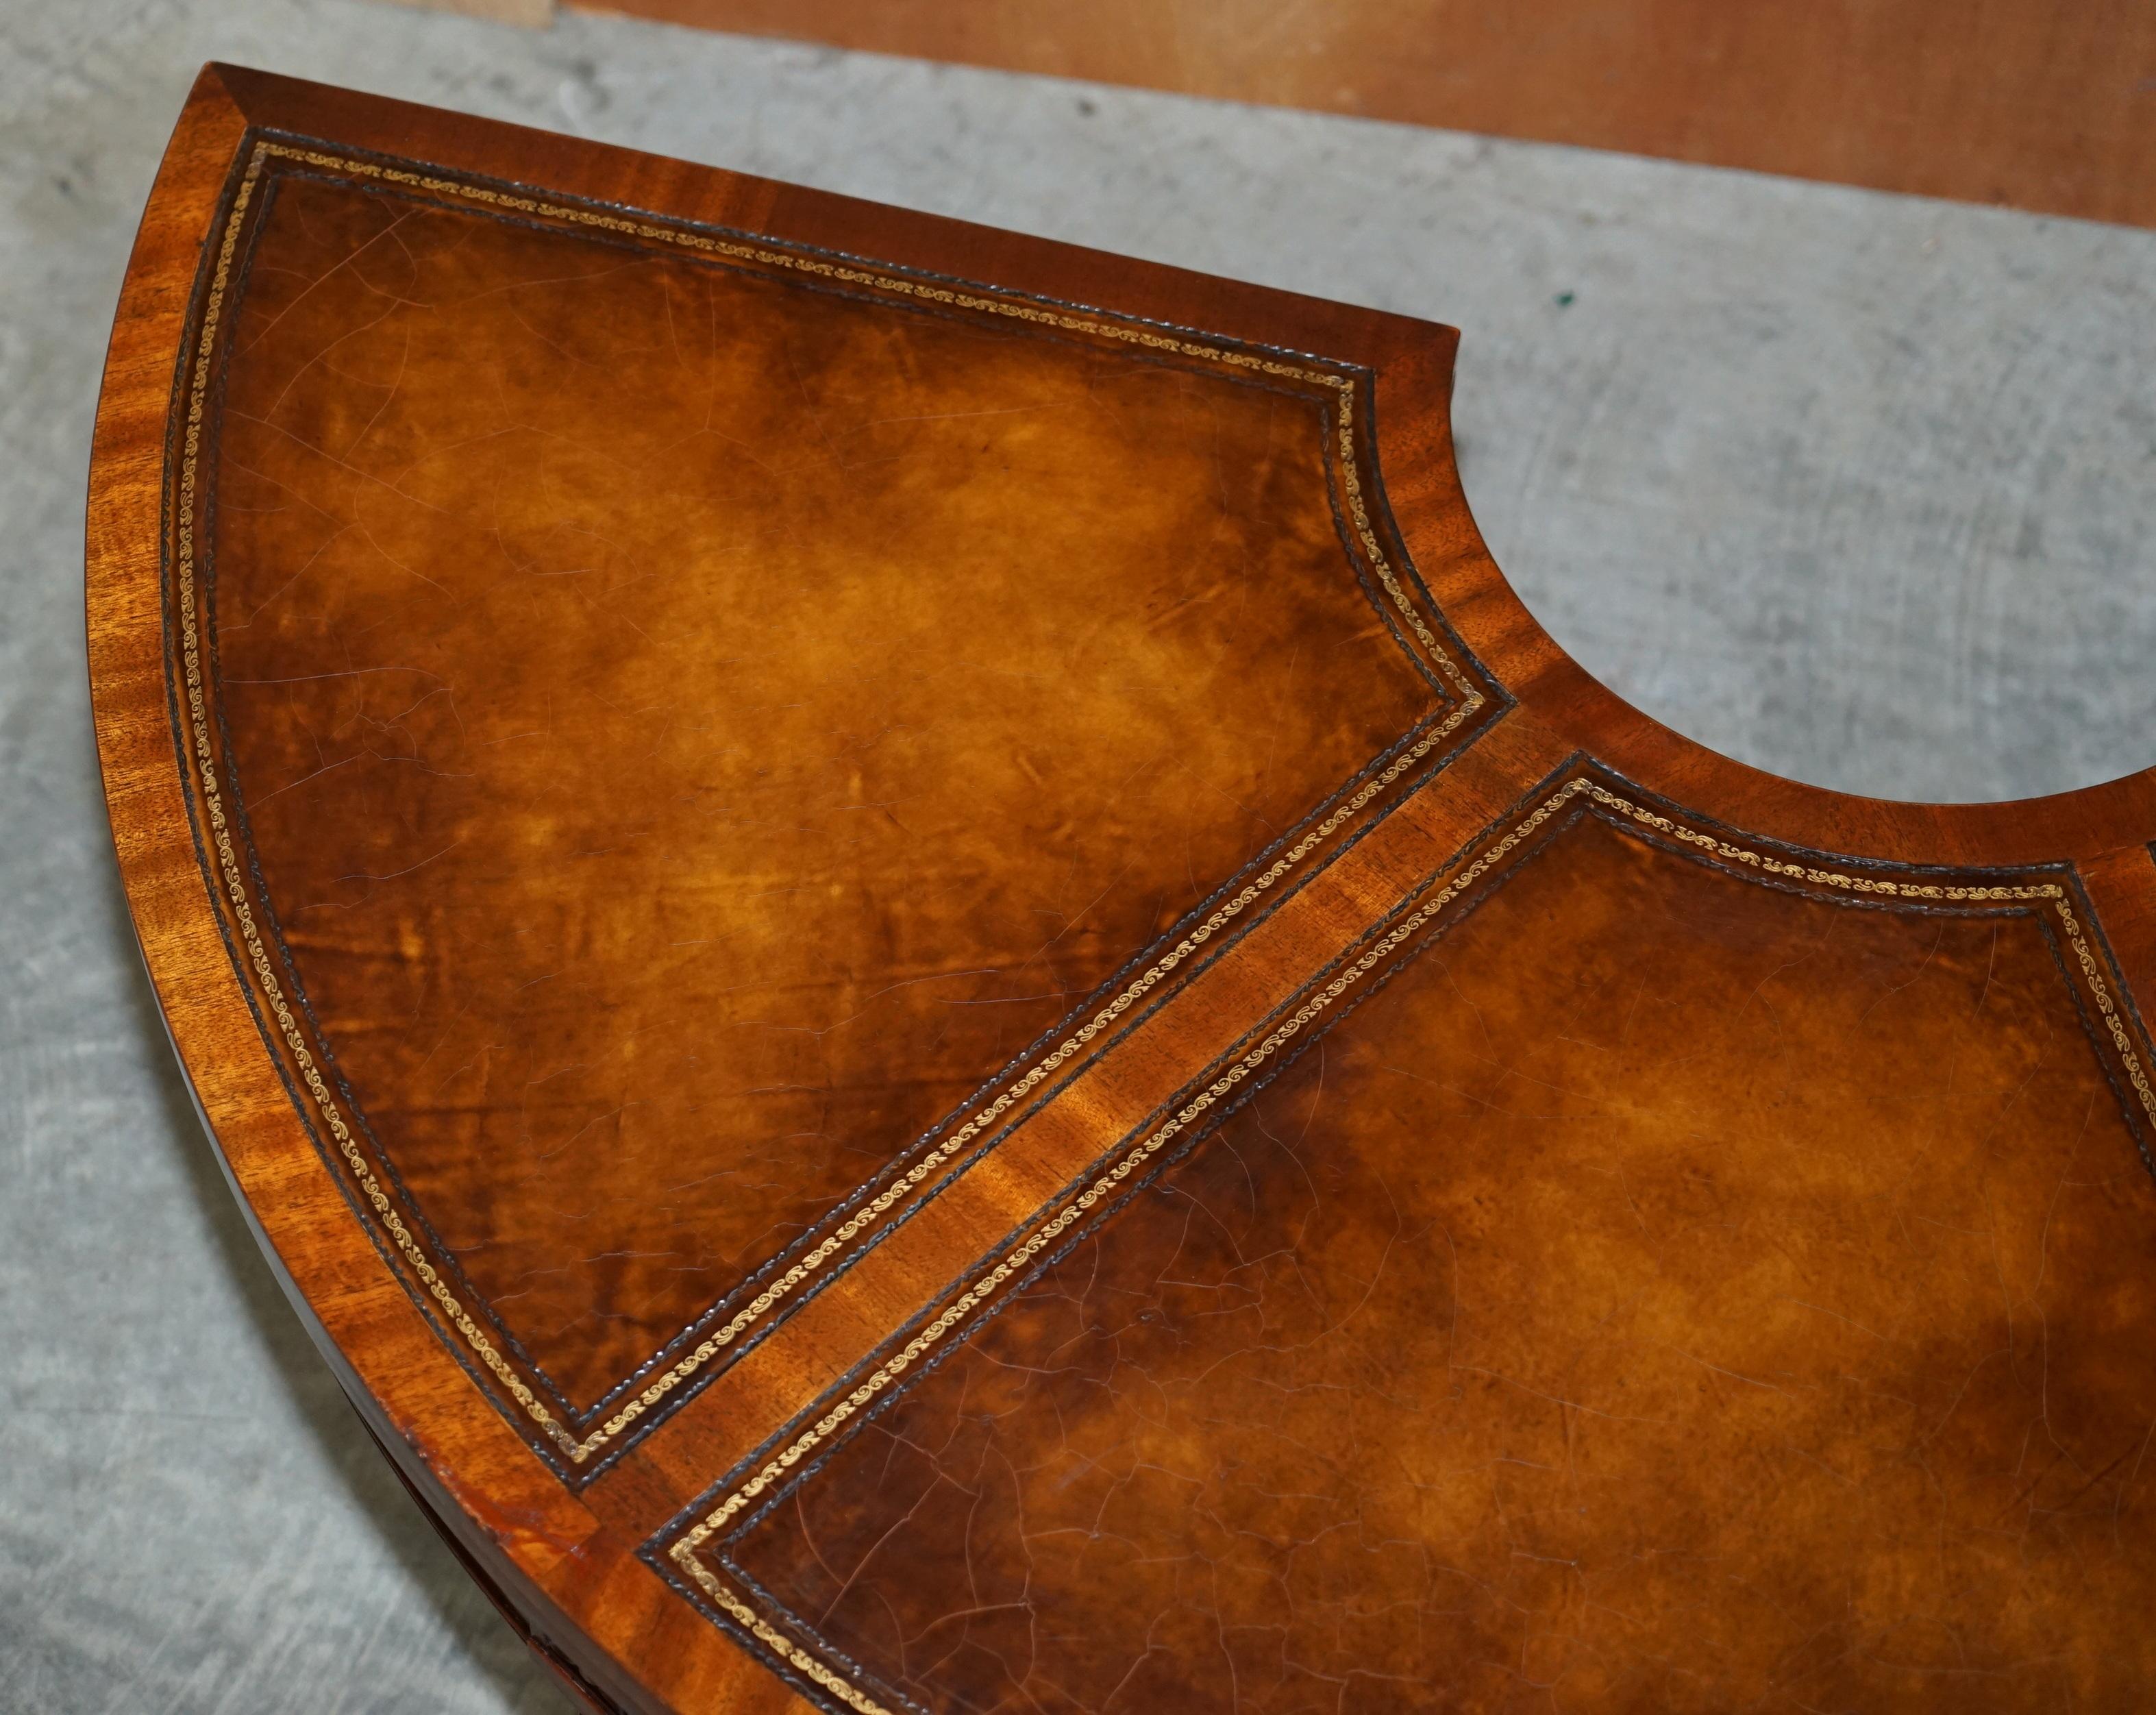 Hand-Crafted Stunning Flamed Hardwood Hand Dyed Brown Leather Extending Coffee Table Must See